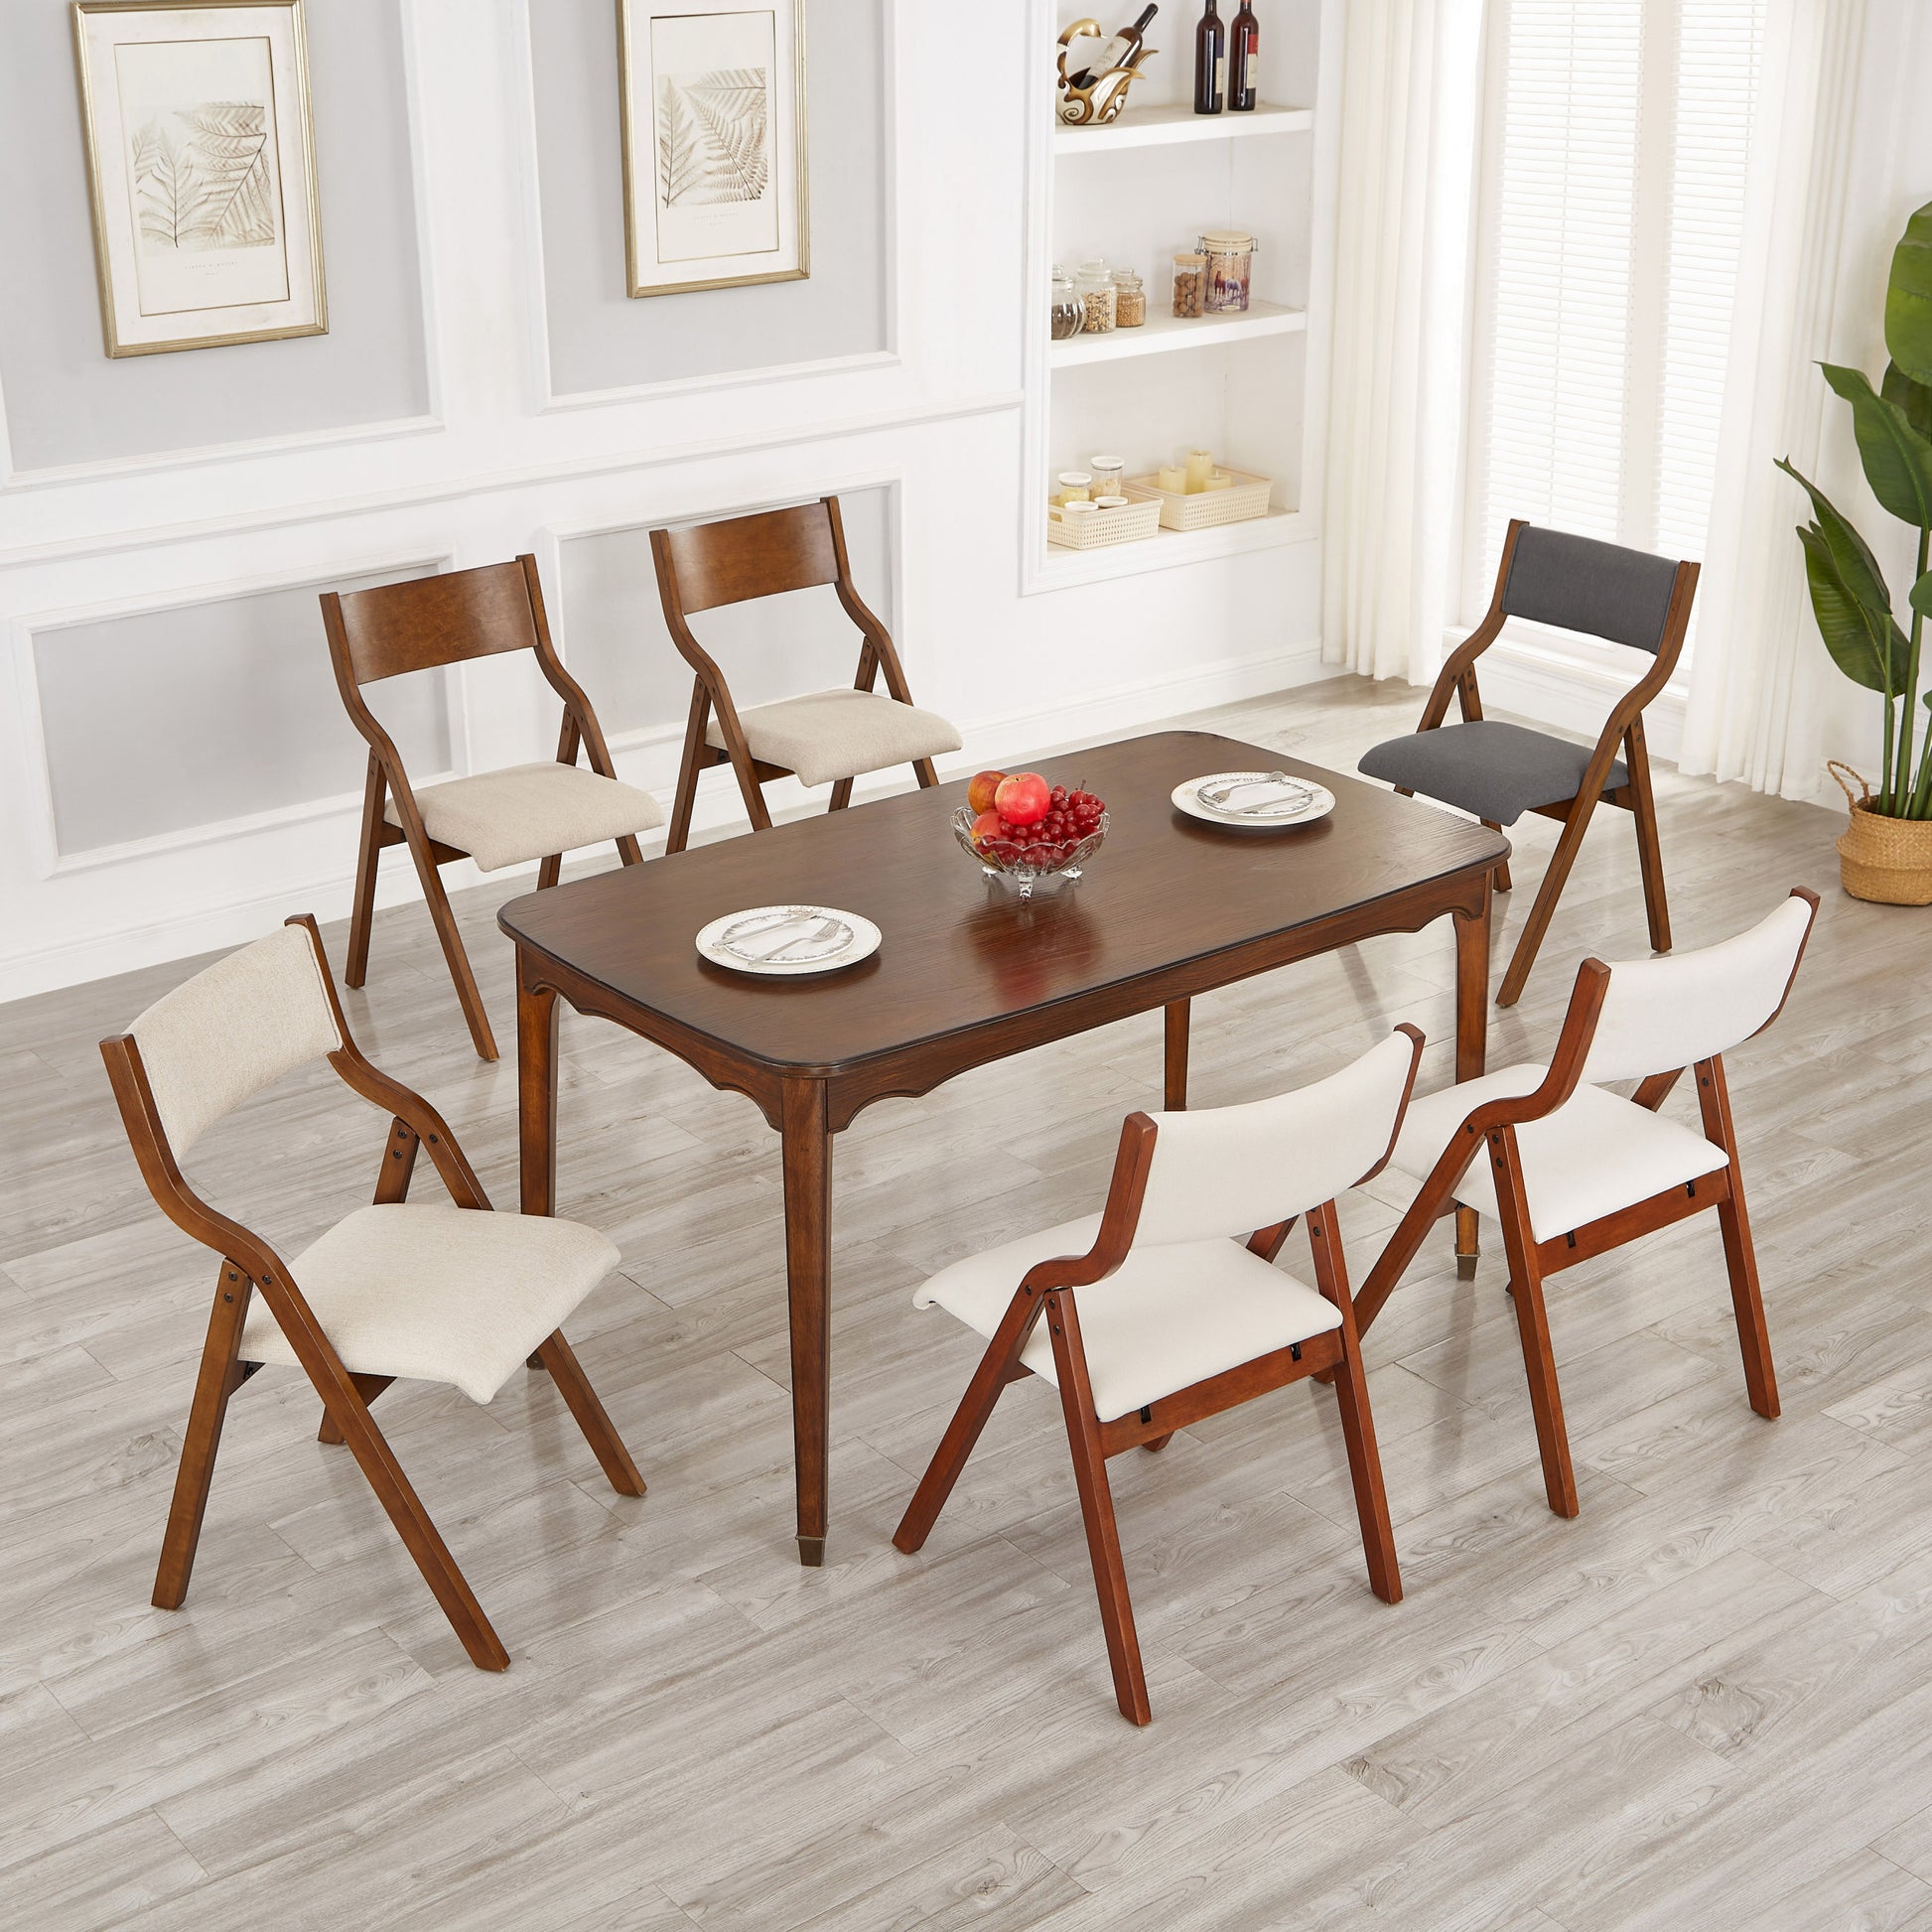 Upholstered Folding Dining Chair, Space Saving,